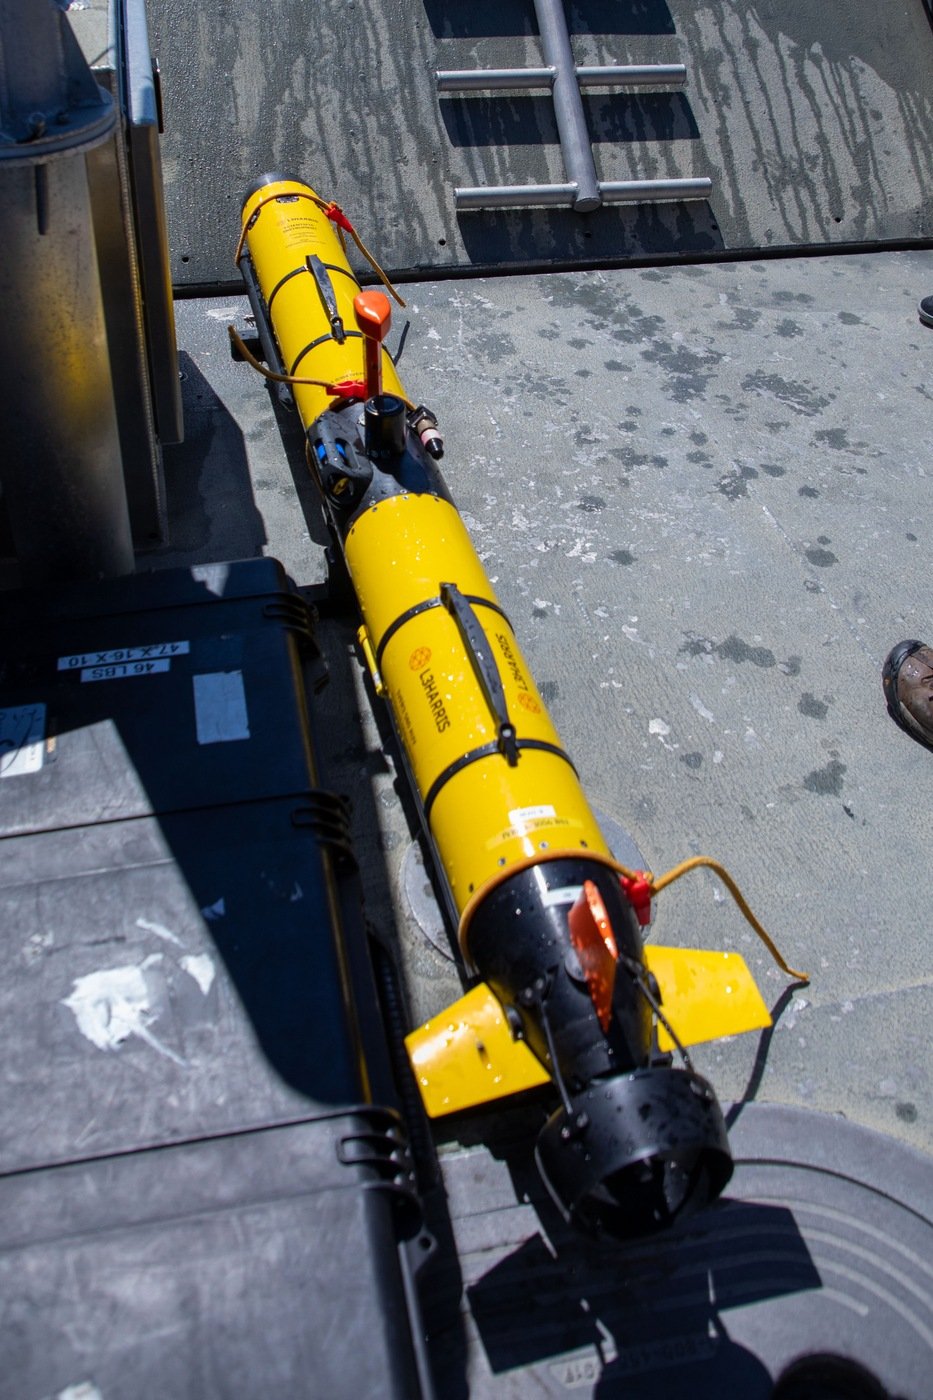 The USERT team used sidescan sonar data collected from this remotely controlled submersible.